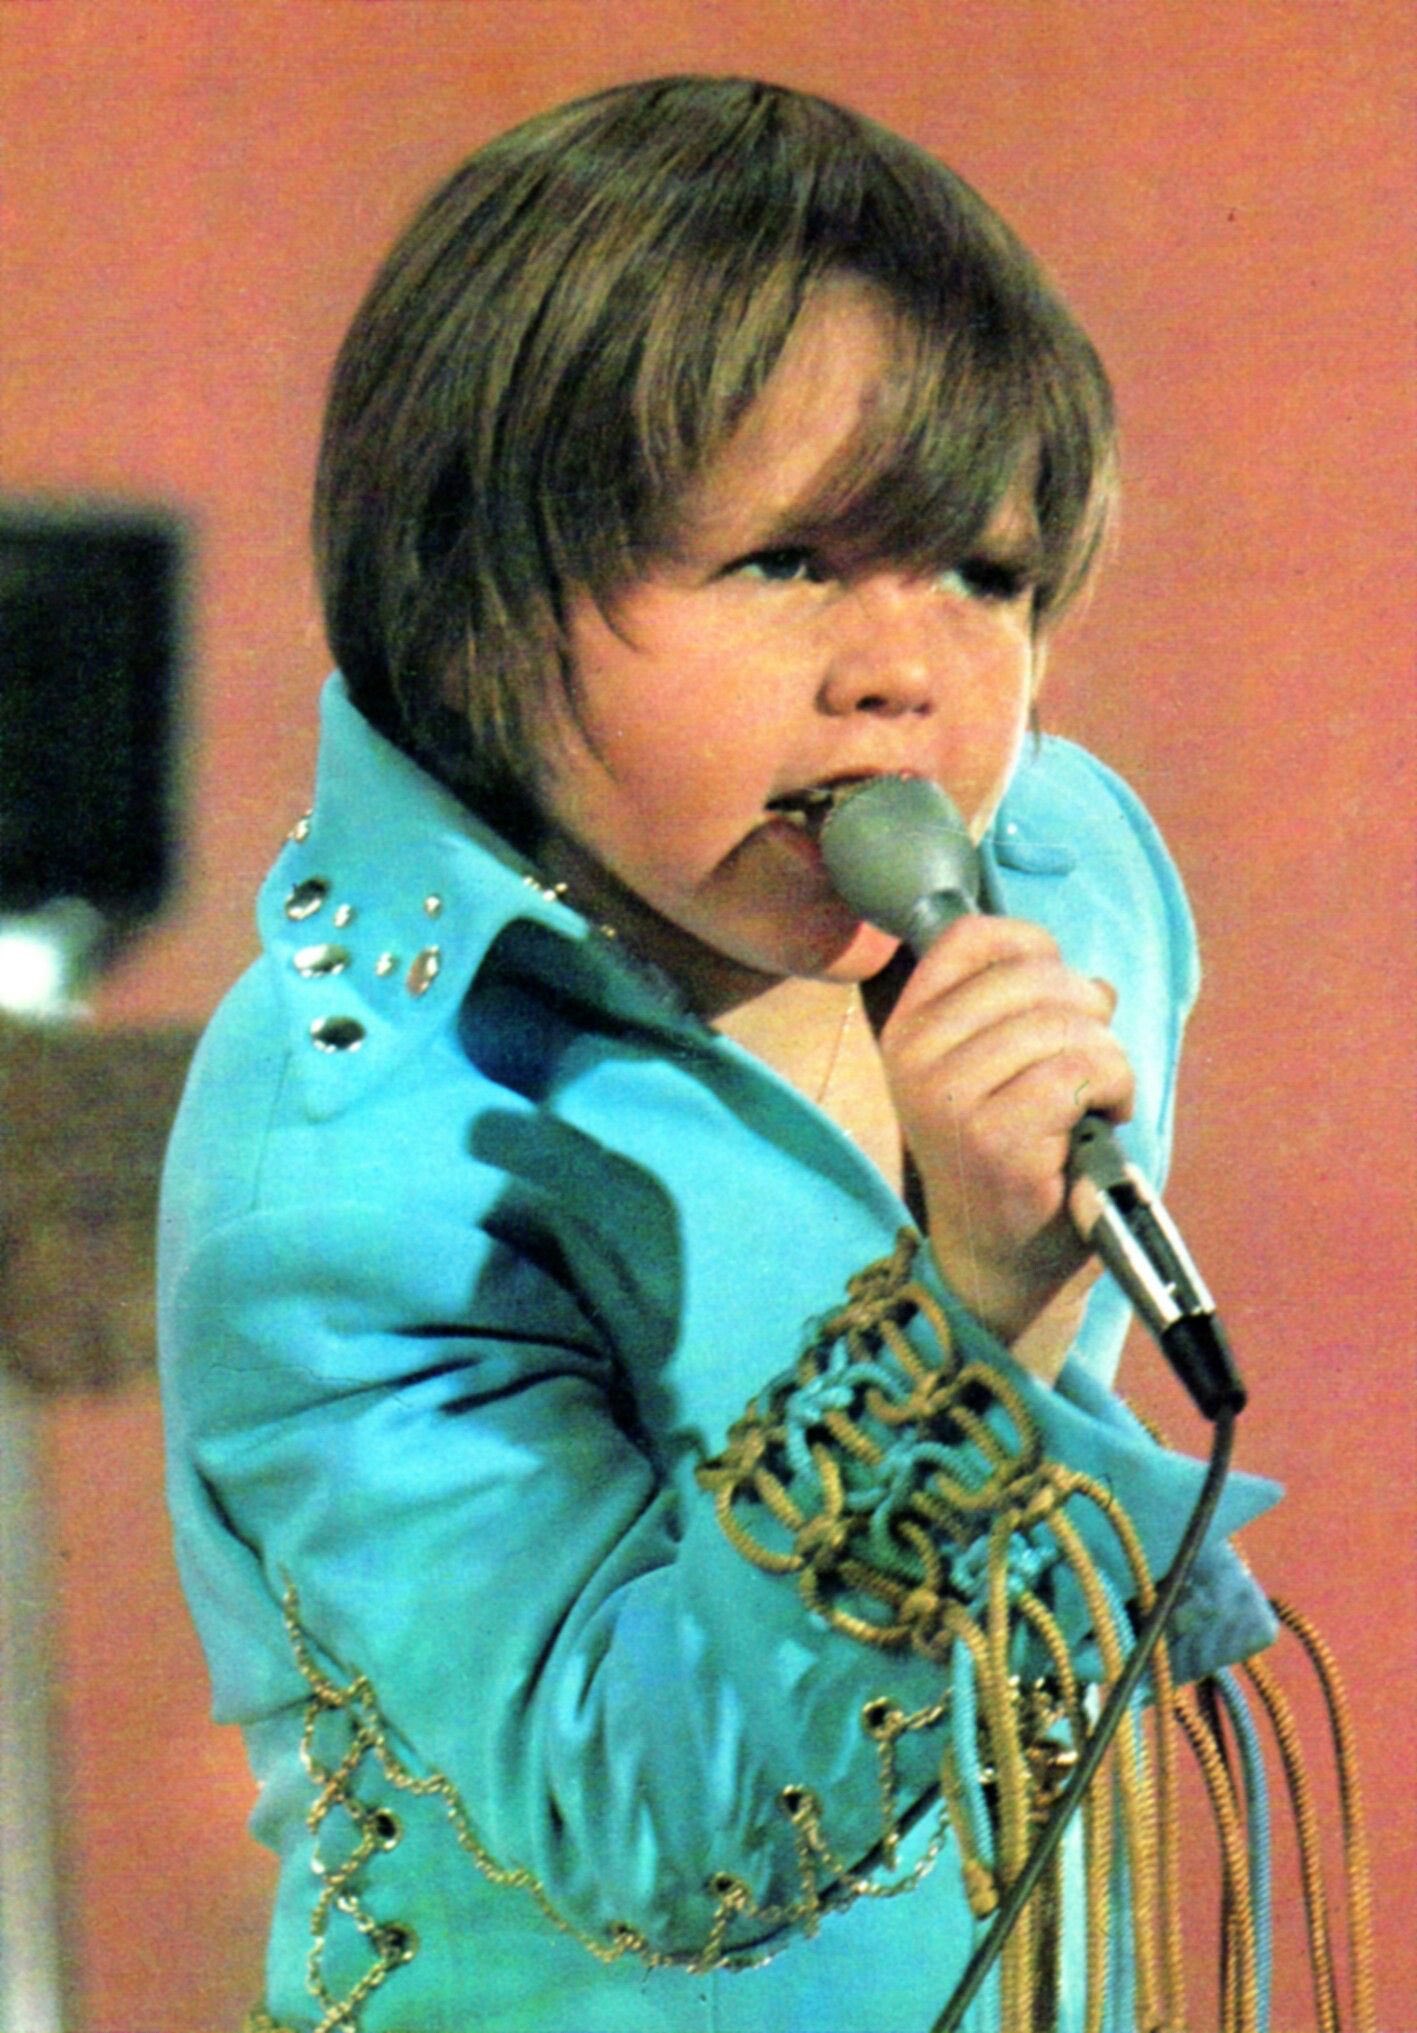 Happy birthday little Jimmy Osmond. My dearly departed dad absolutely loathed him 